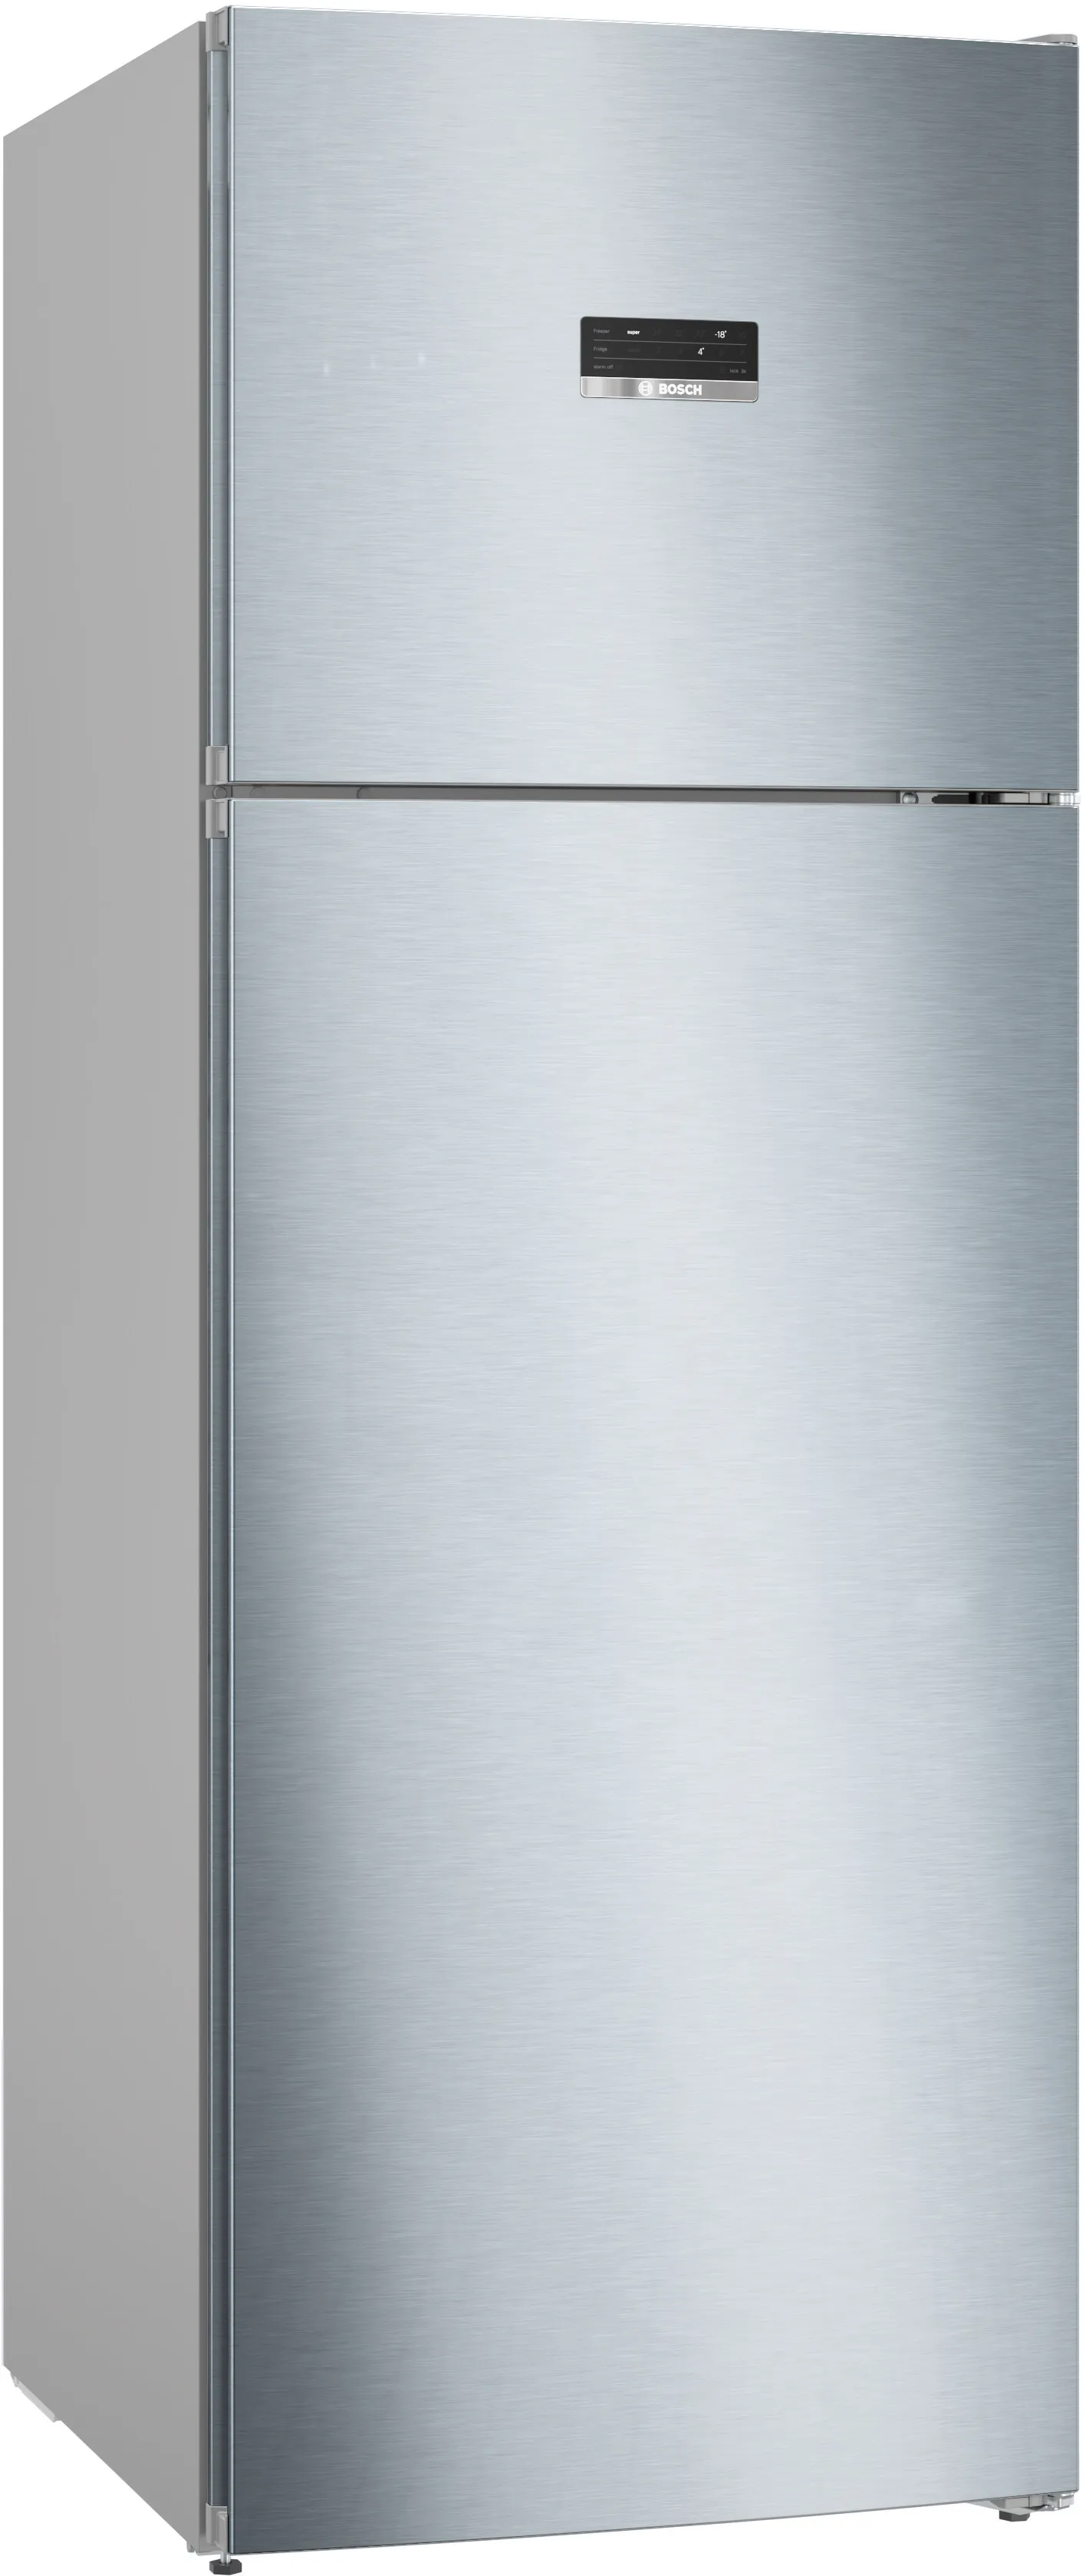 Series 4 free-standing fridge-freezer with freezer at top 193 x 70 cm Stainless steel (with anti-fingerprint) 